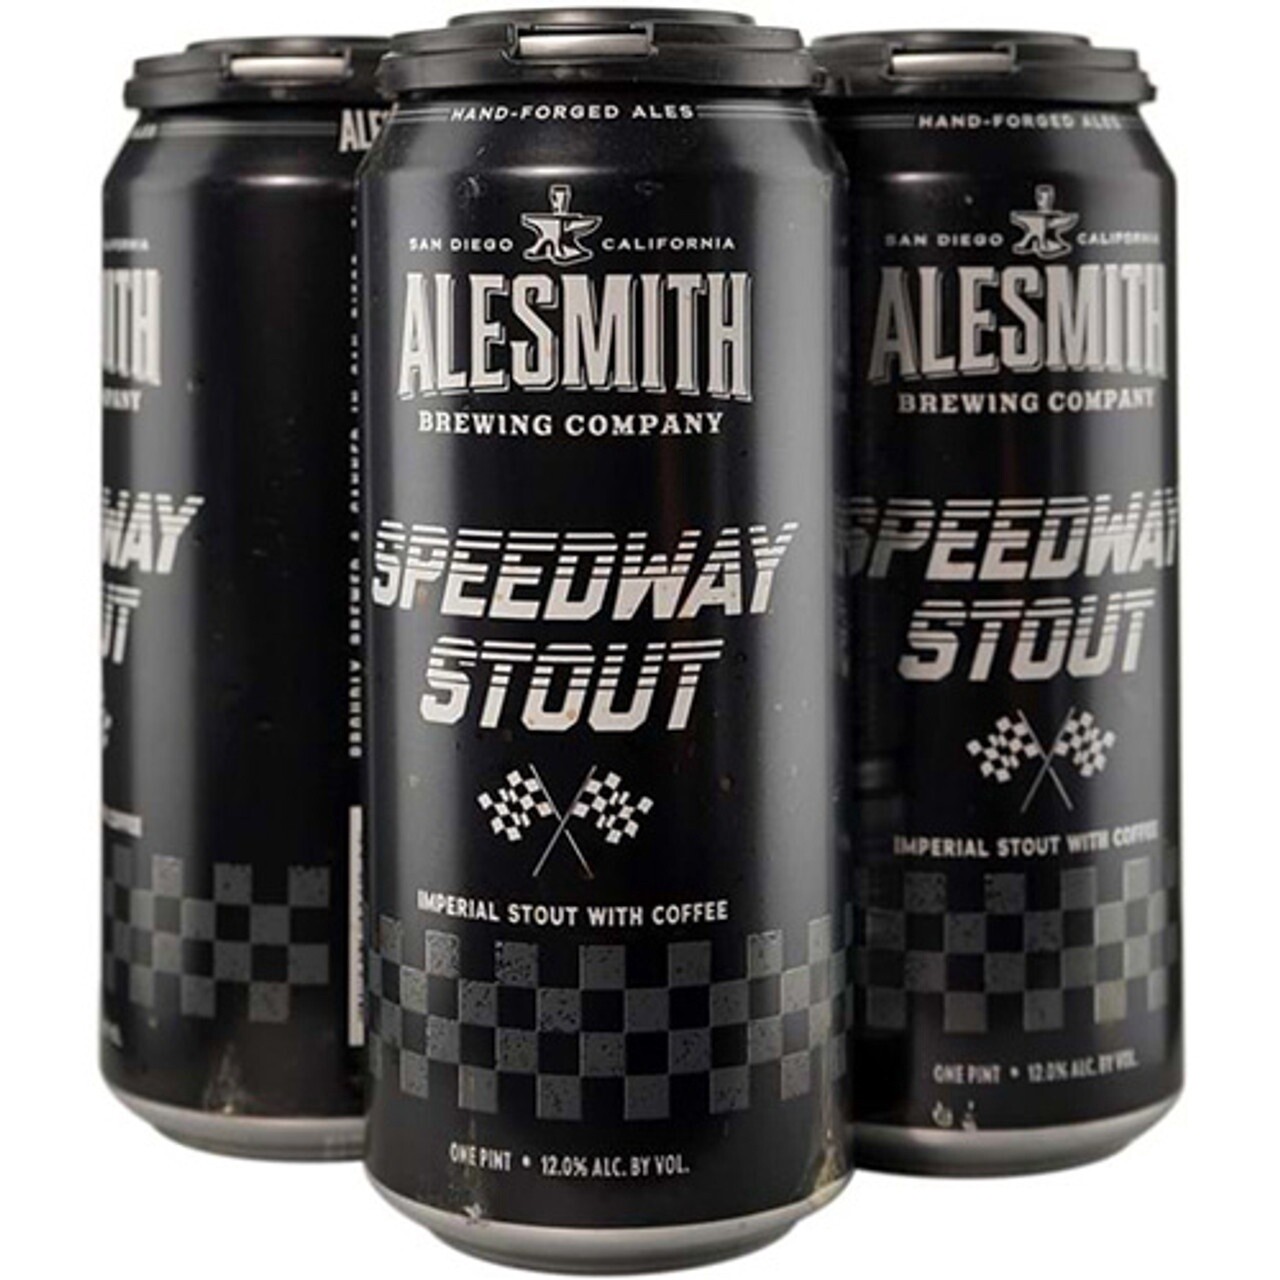 Alesmith Speedway Imperial Coffee Stout 4pk Cans